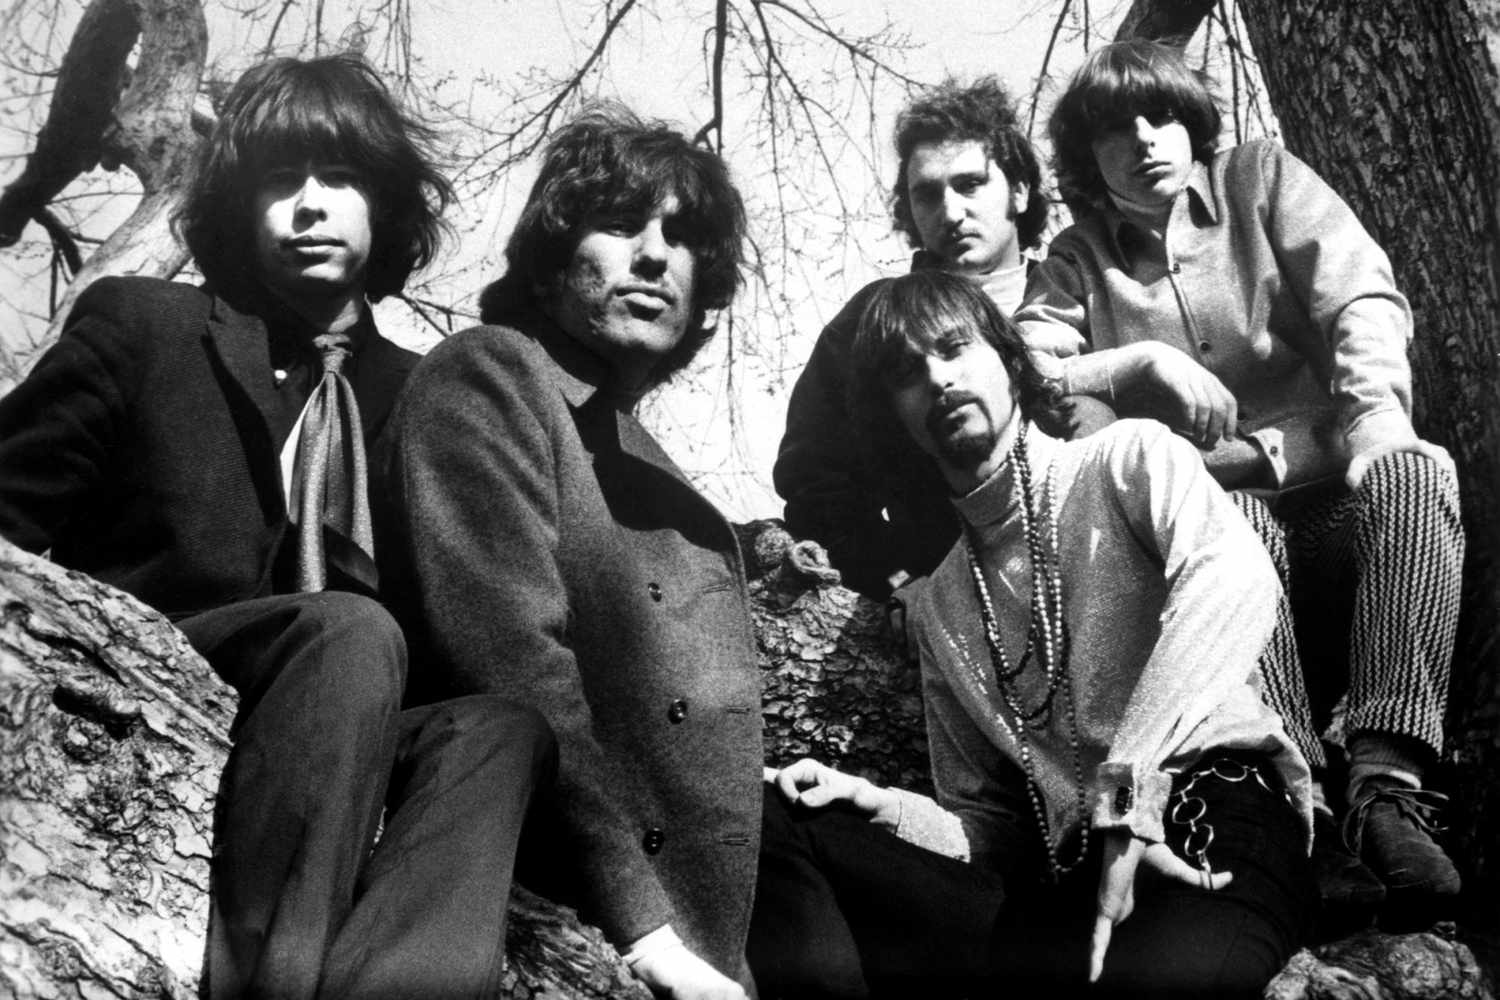 Rock and Roll group The Chain Reaction with future Aerosmith singer Steven Tyler (far left) pose for a portrait circa 1967 in New York City